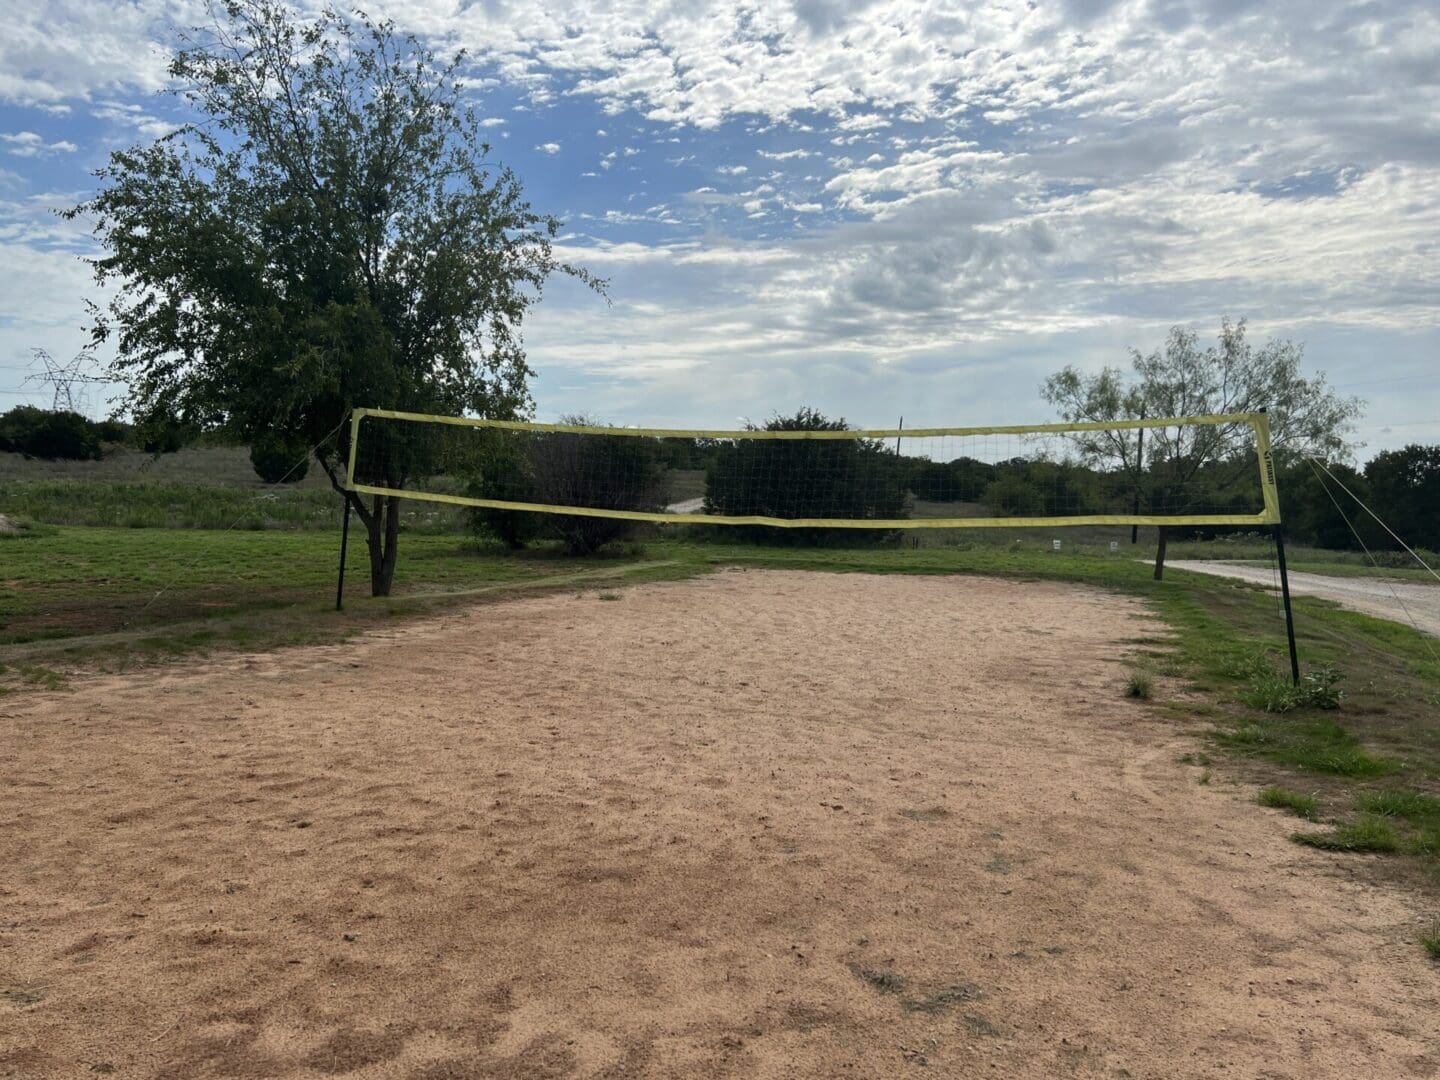 A volleyball net in the middle of an empty field.